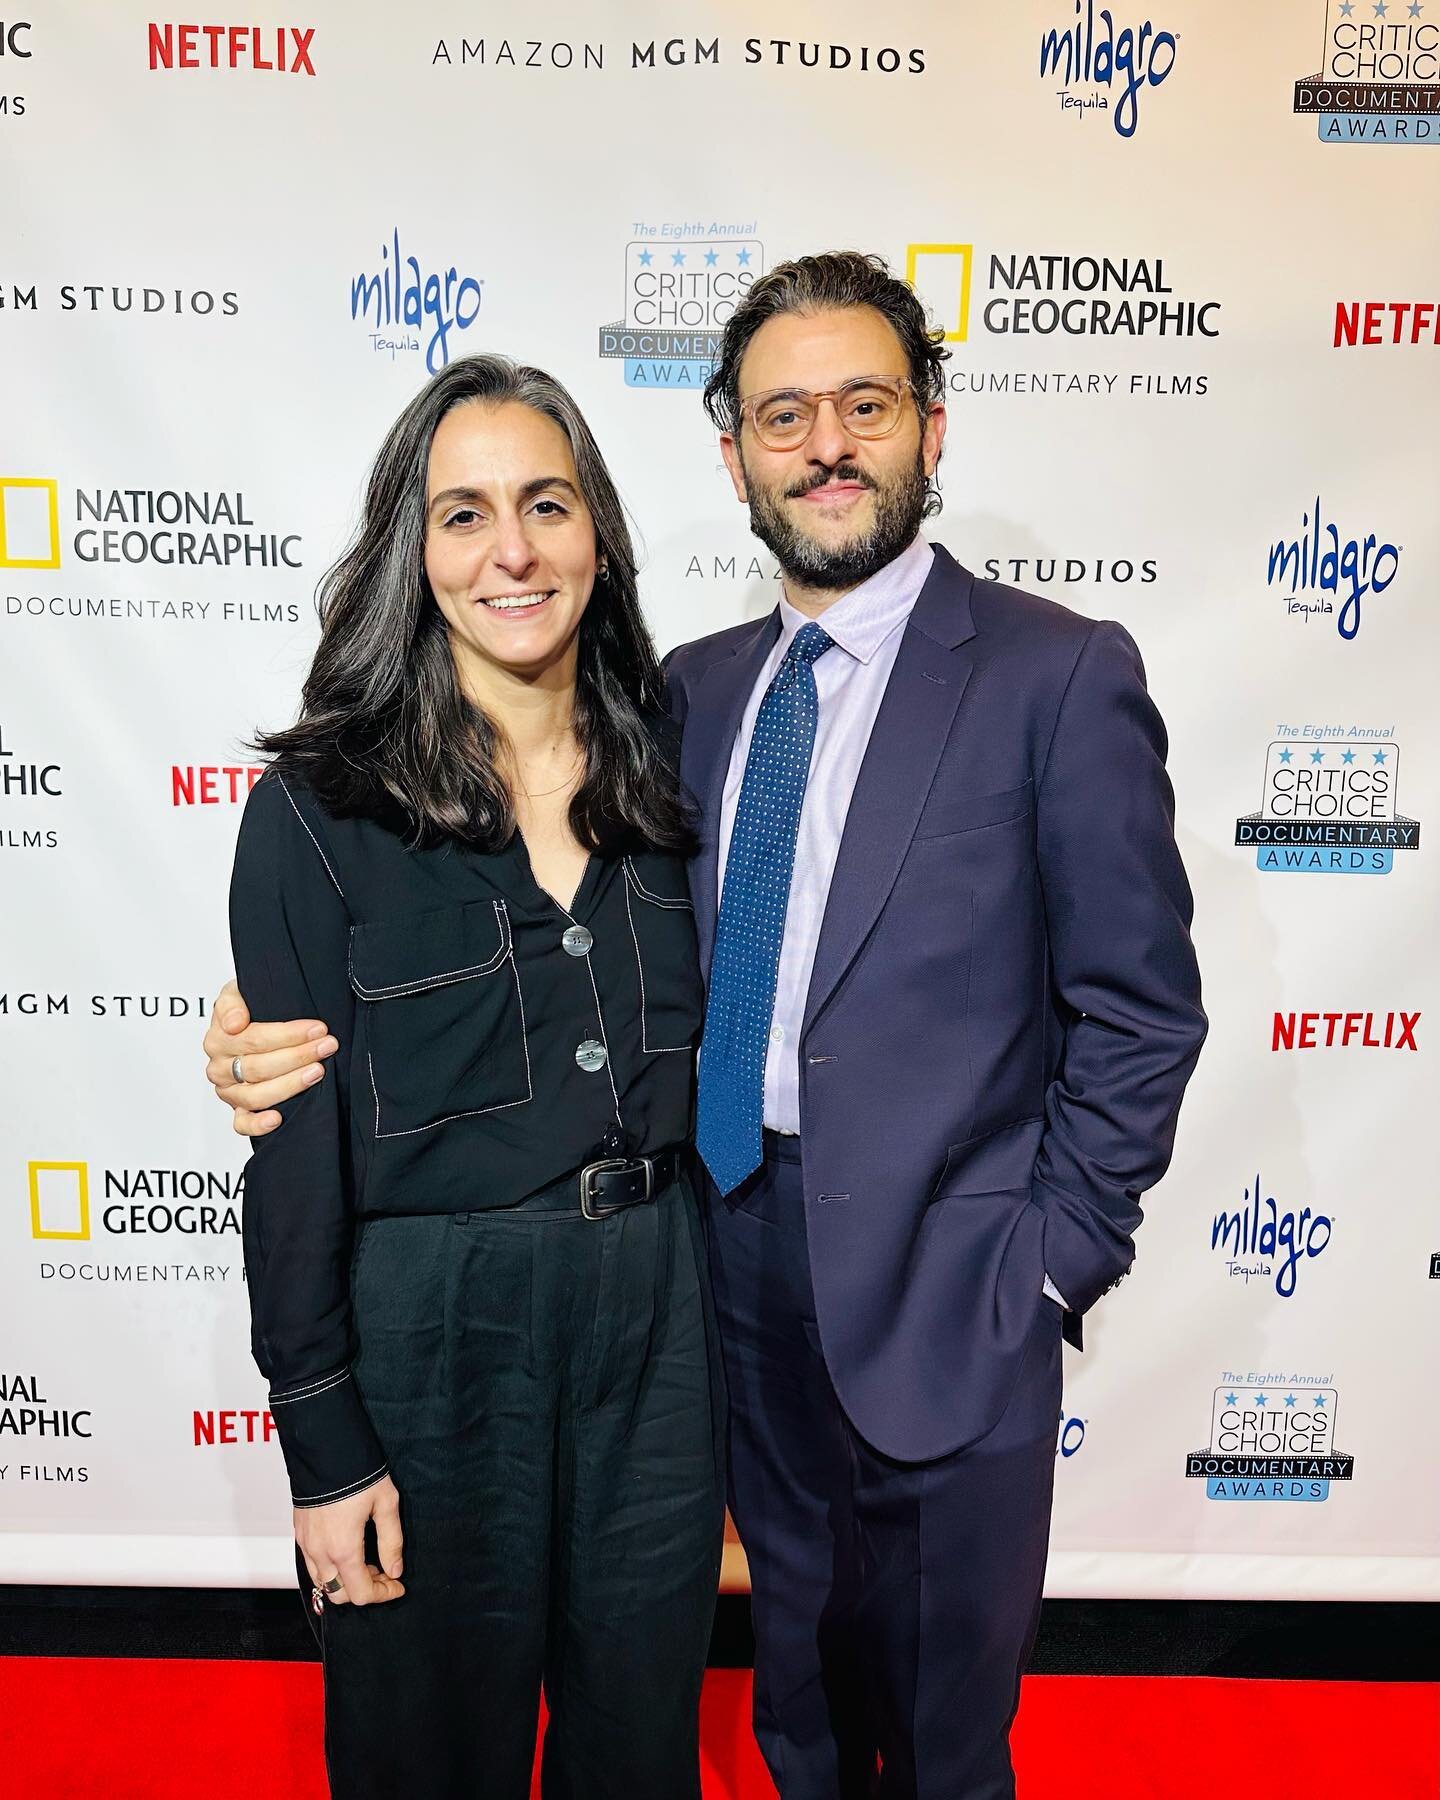 What a fantastic evening @criticschoice last night! Thanks so much to Joonam EP @arianmoayed for your continued support.

An incredible night spent celebrating many of this year&rsquo;s important documentaries and filmmakers!

#CCADocAwards #CriticsC